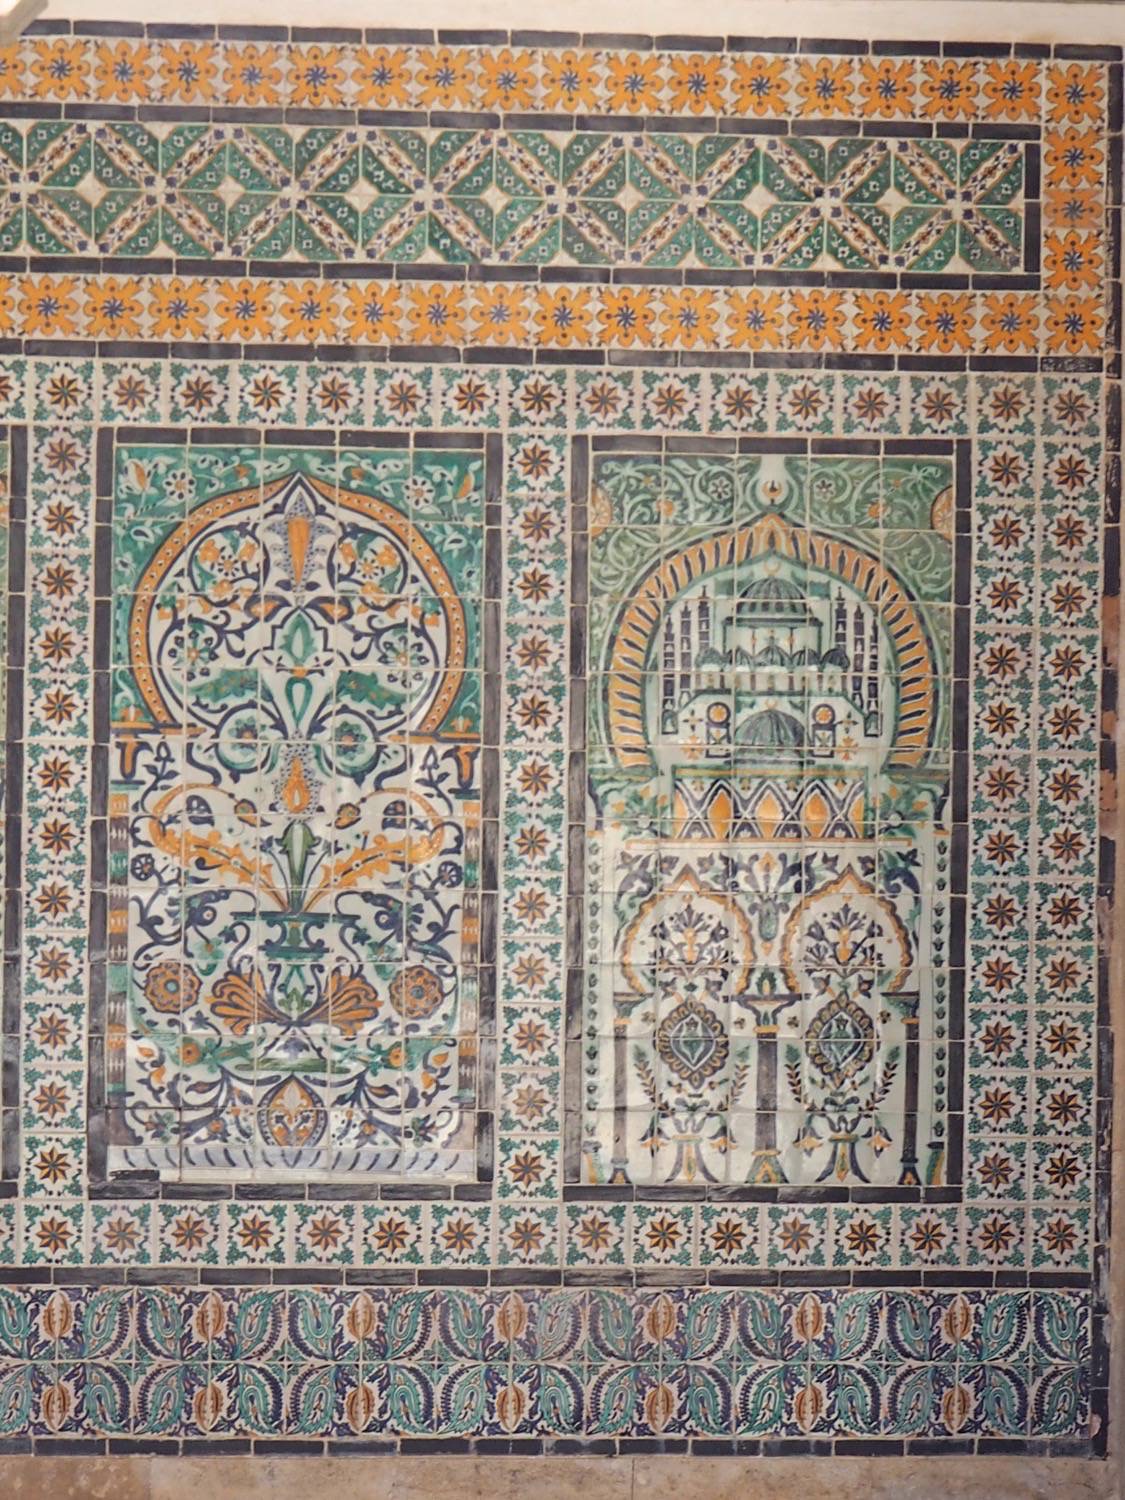 View of decorative tile with floral and architectural motifs